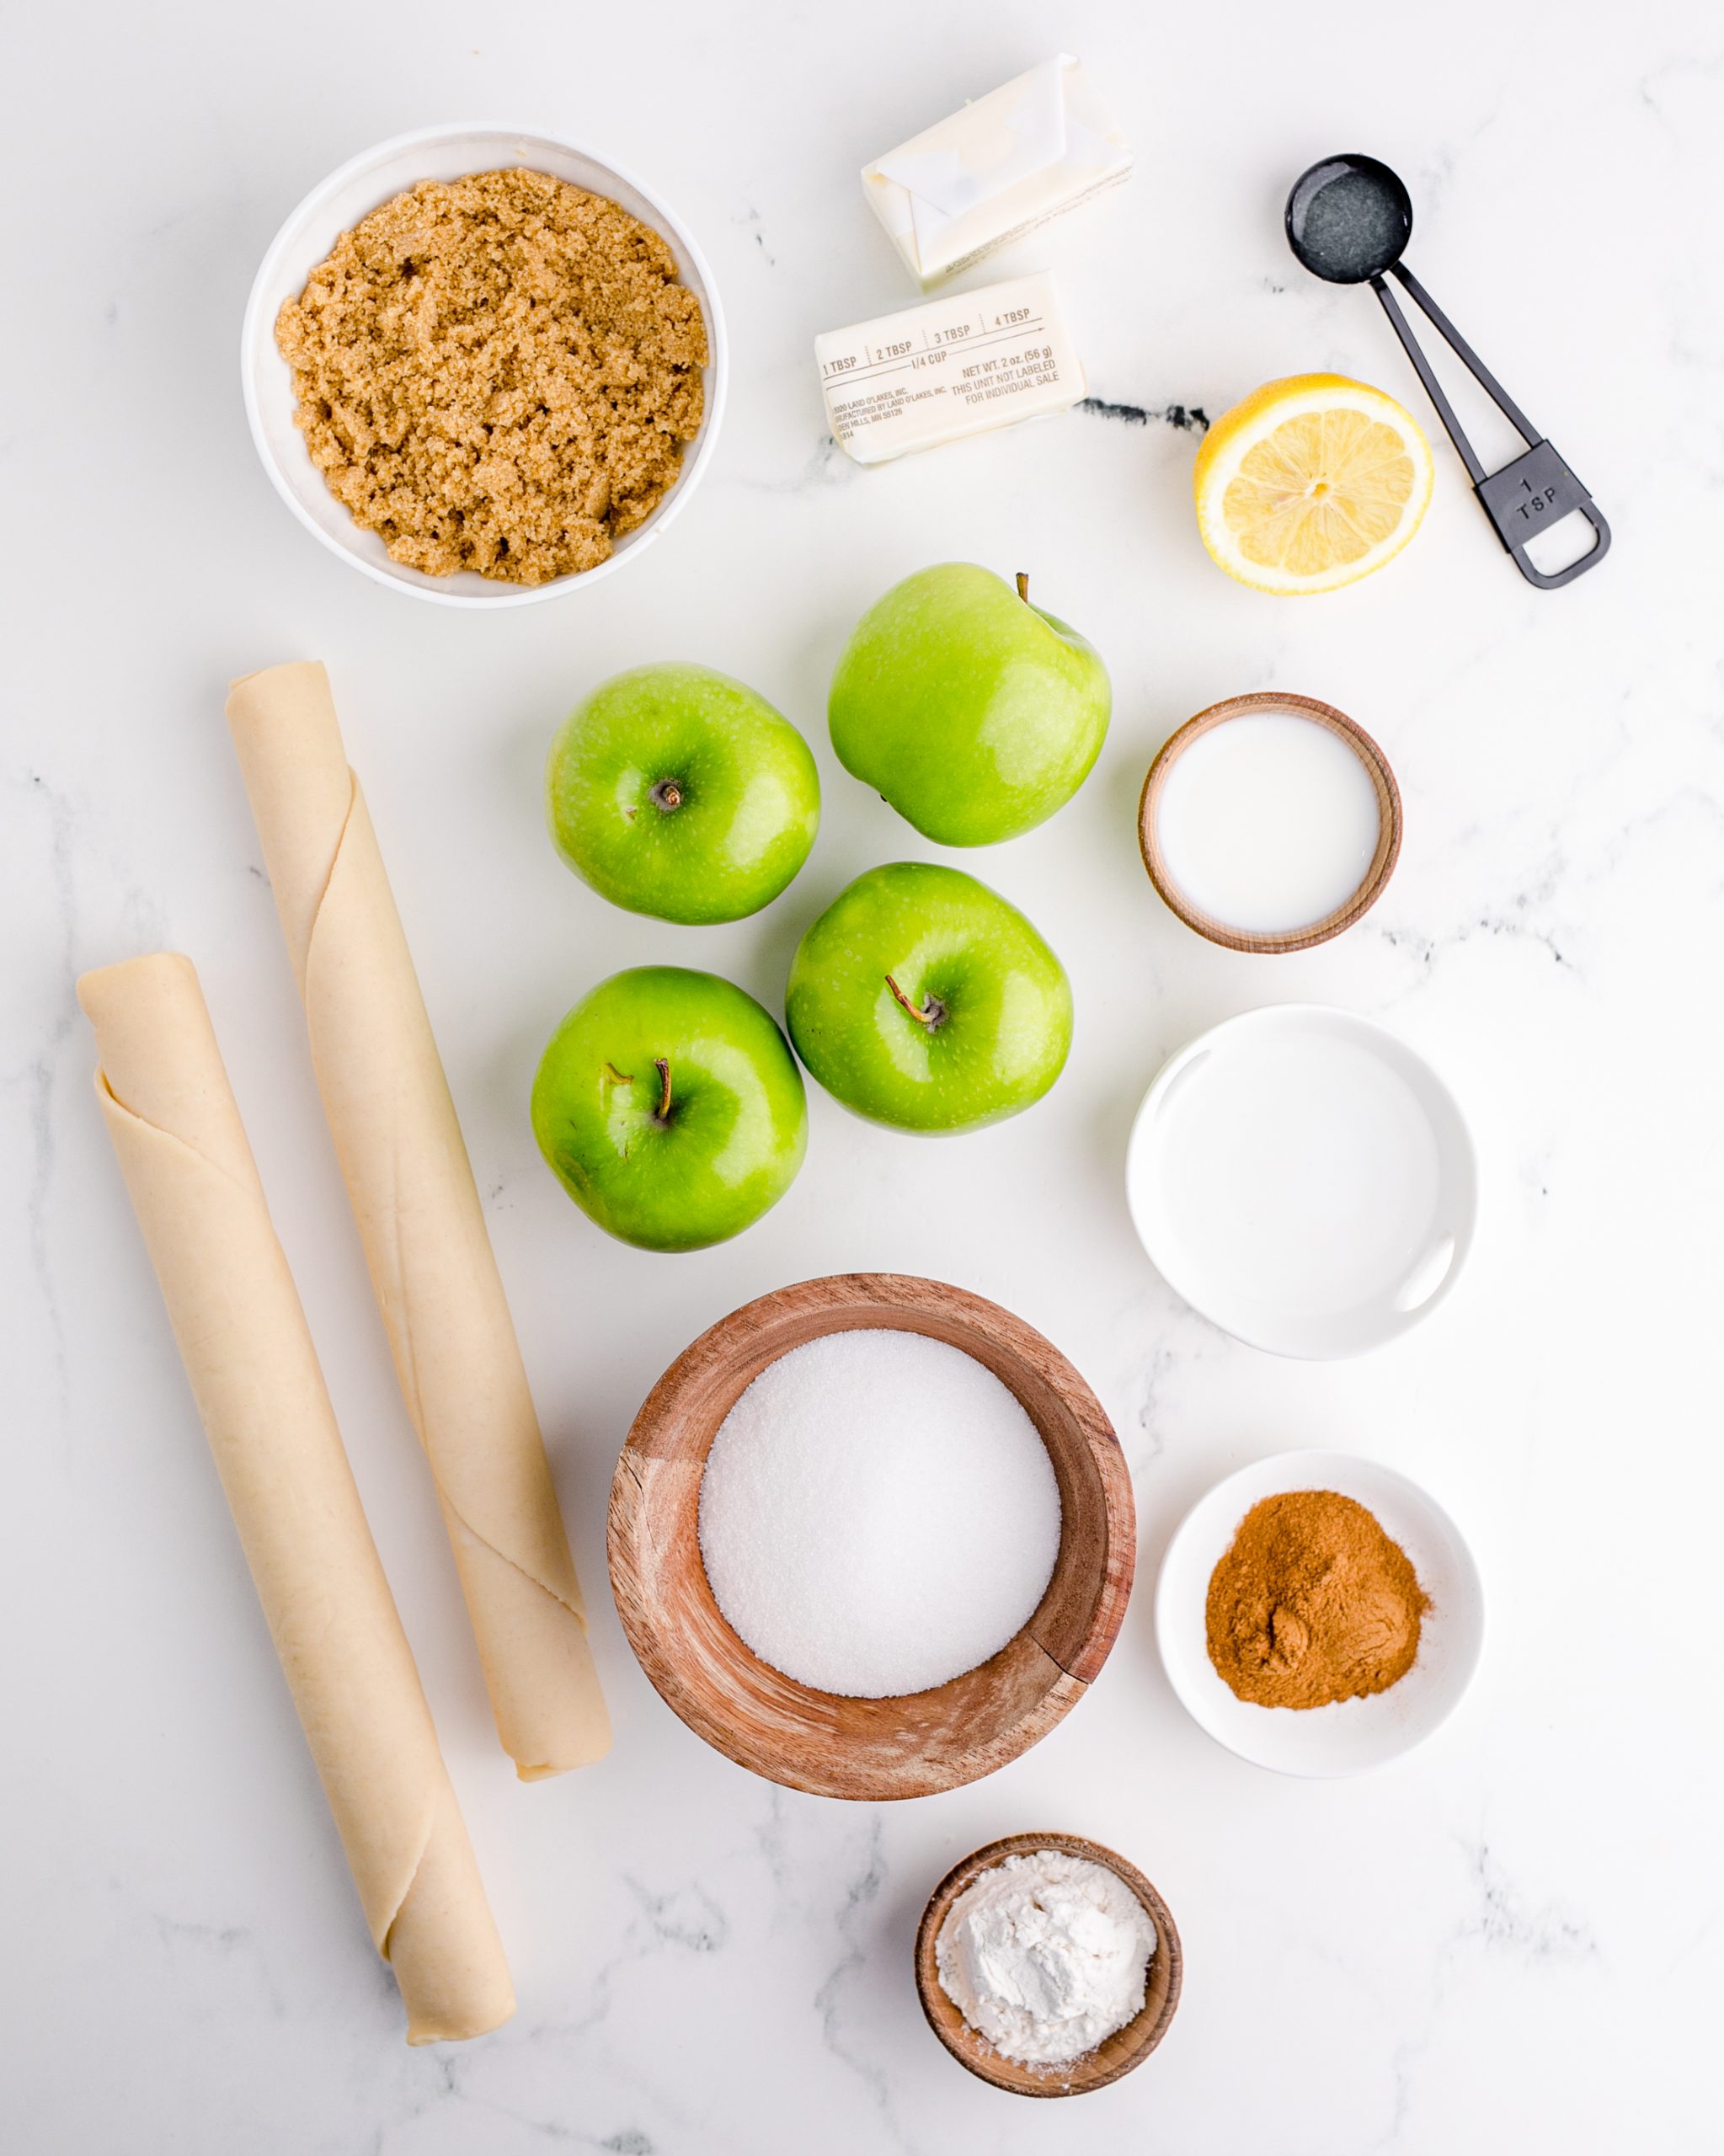 A photo of all the ingredients needed to make a classic apple pie.